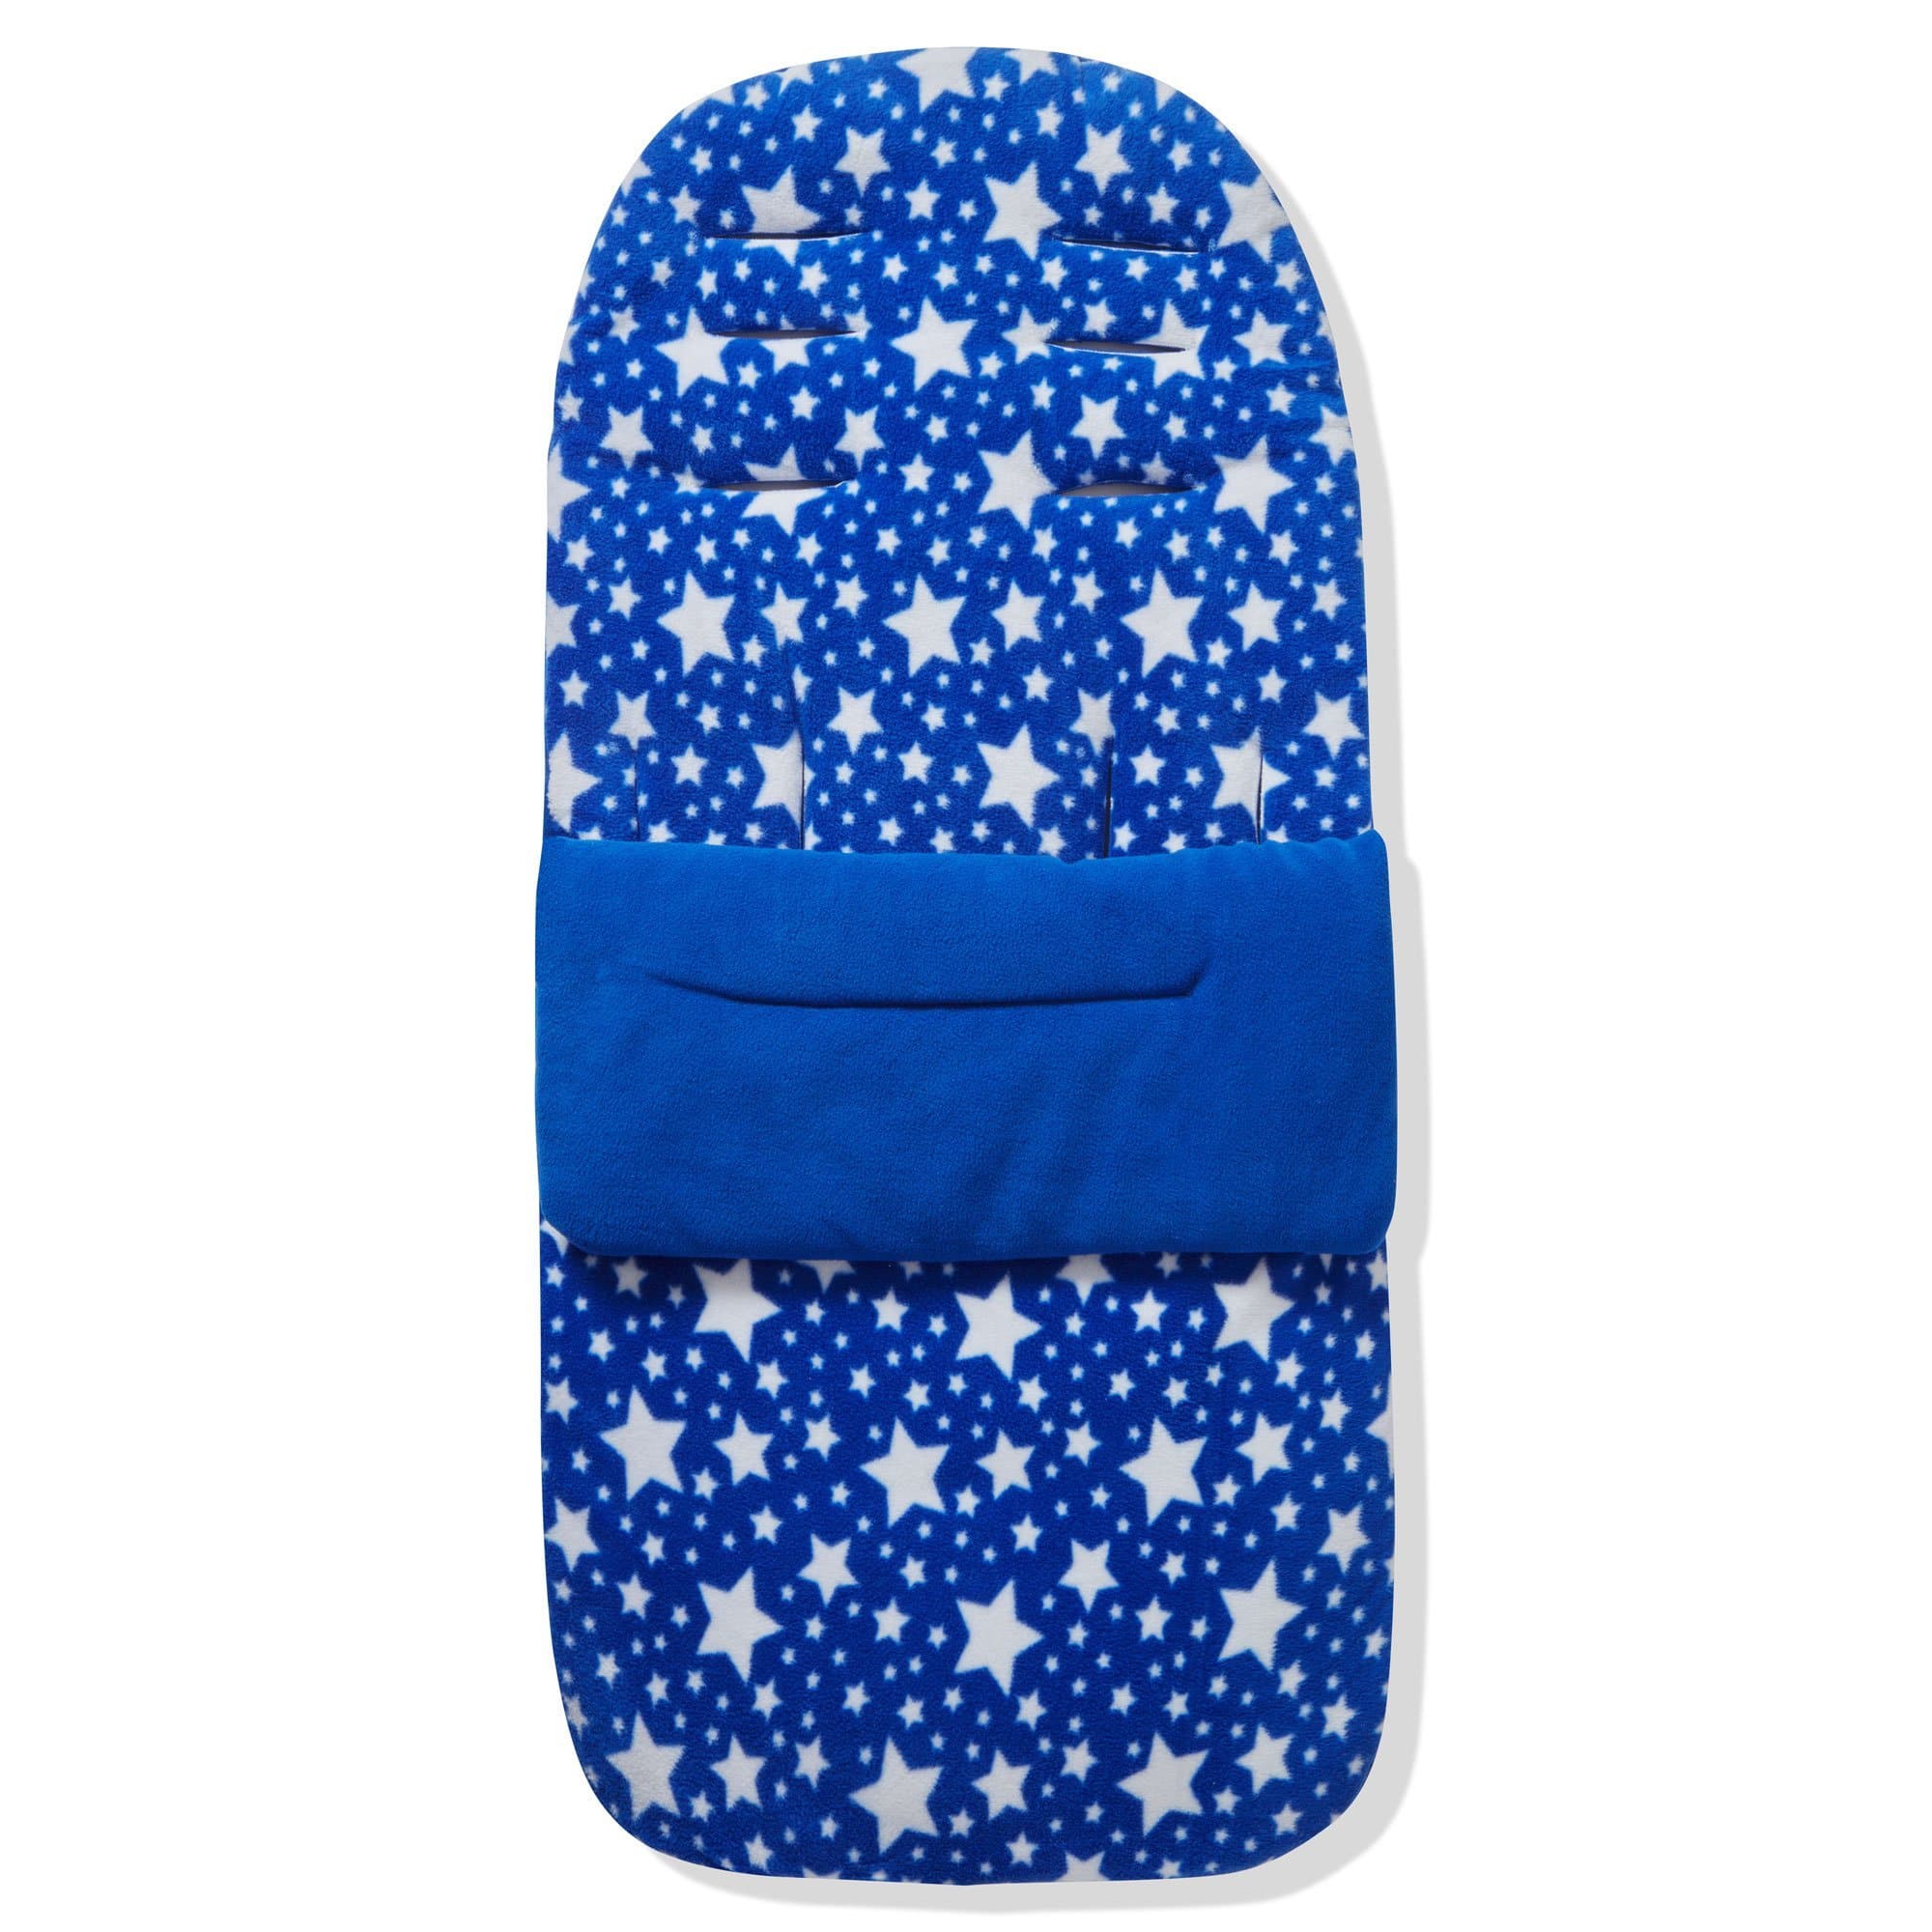 Fleece Footmuff / Cosy Toes Compatible with Norton - For Your Little One